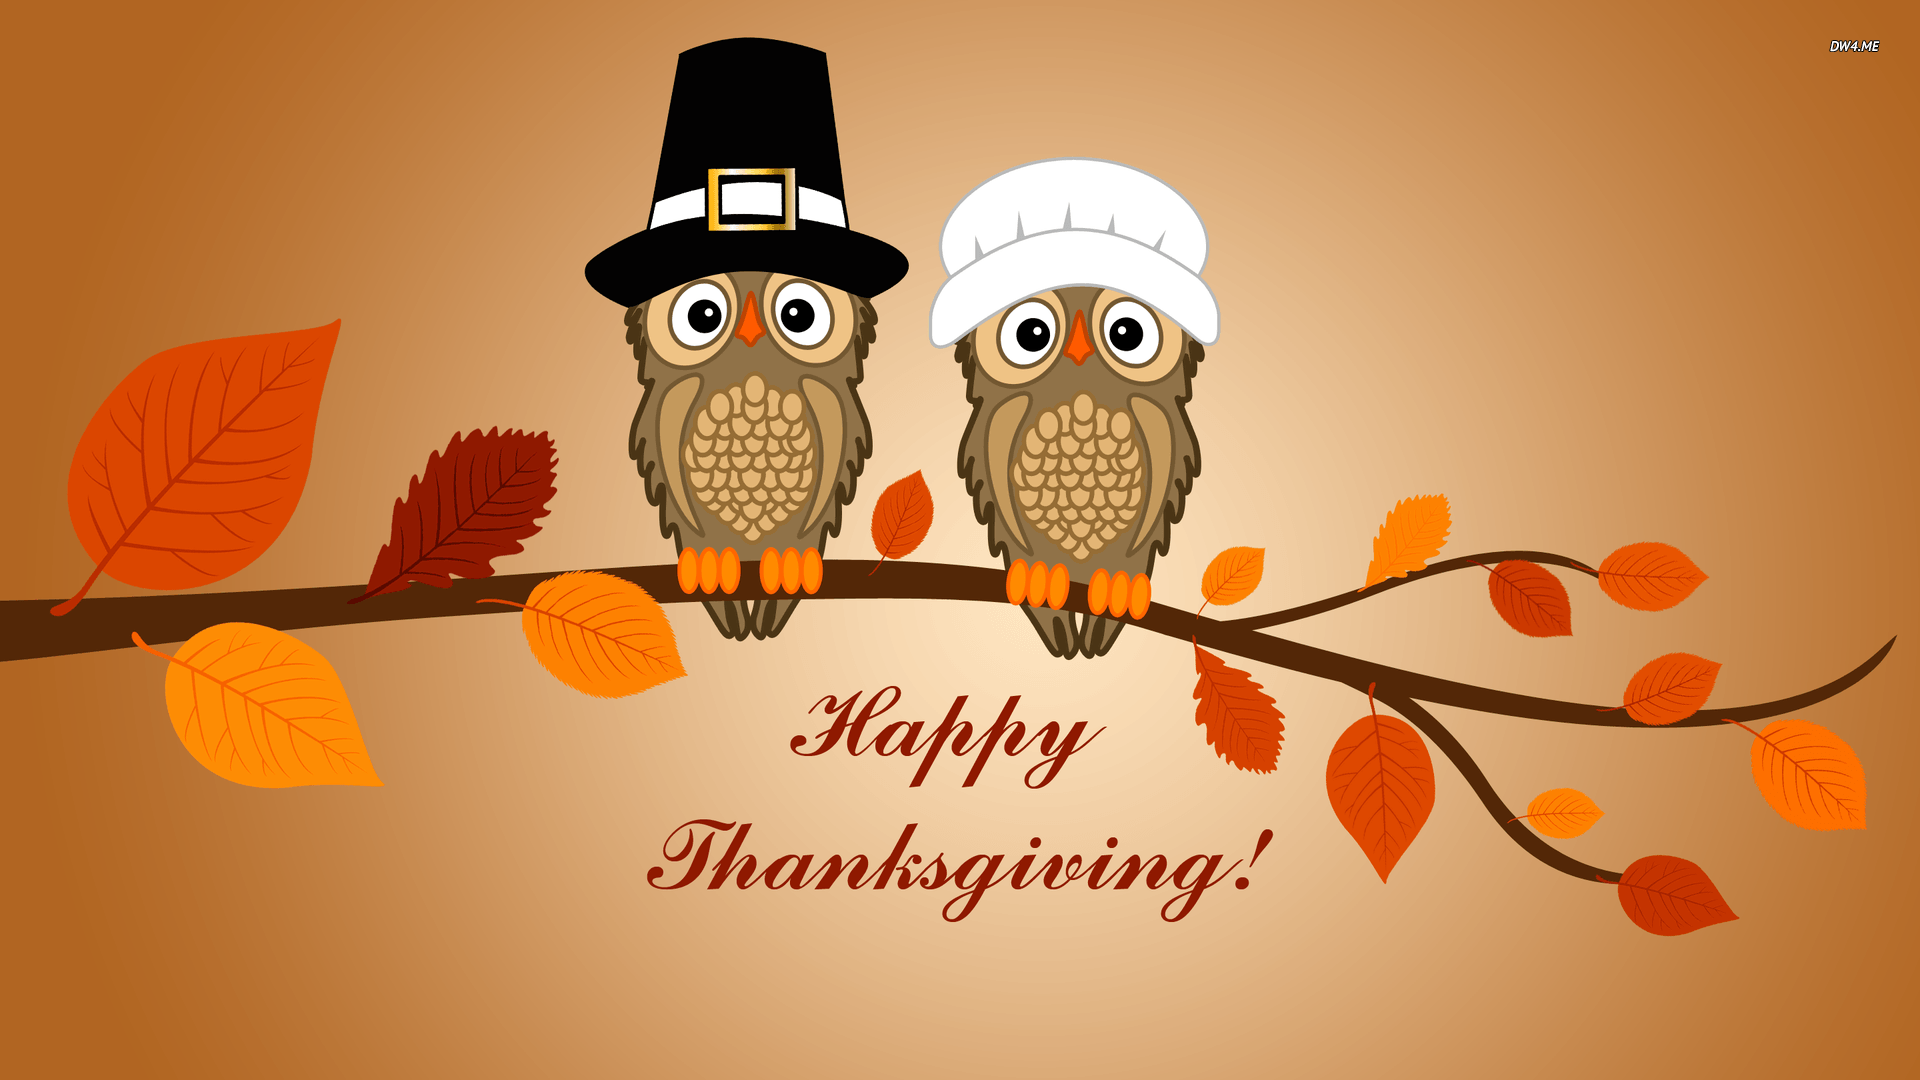 Wallpapers For > Happy Thanksgiving Backgrounds